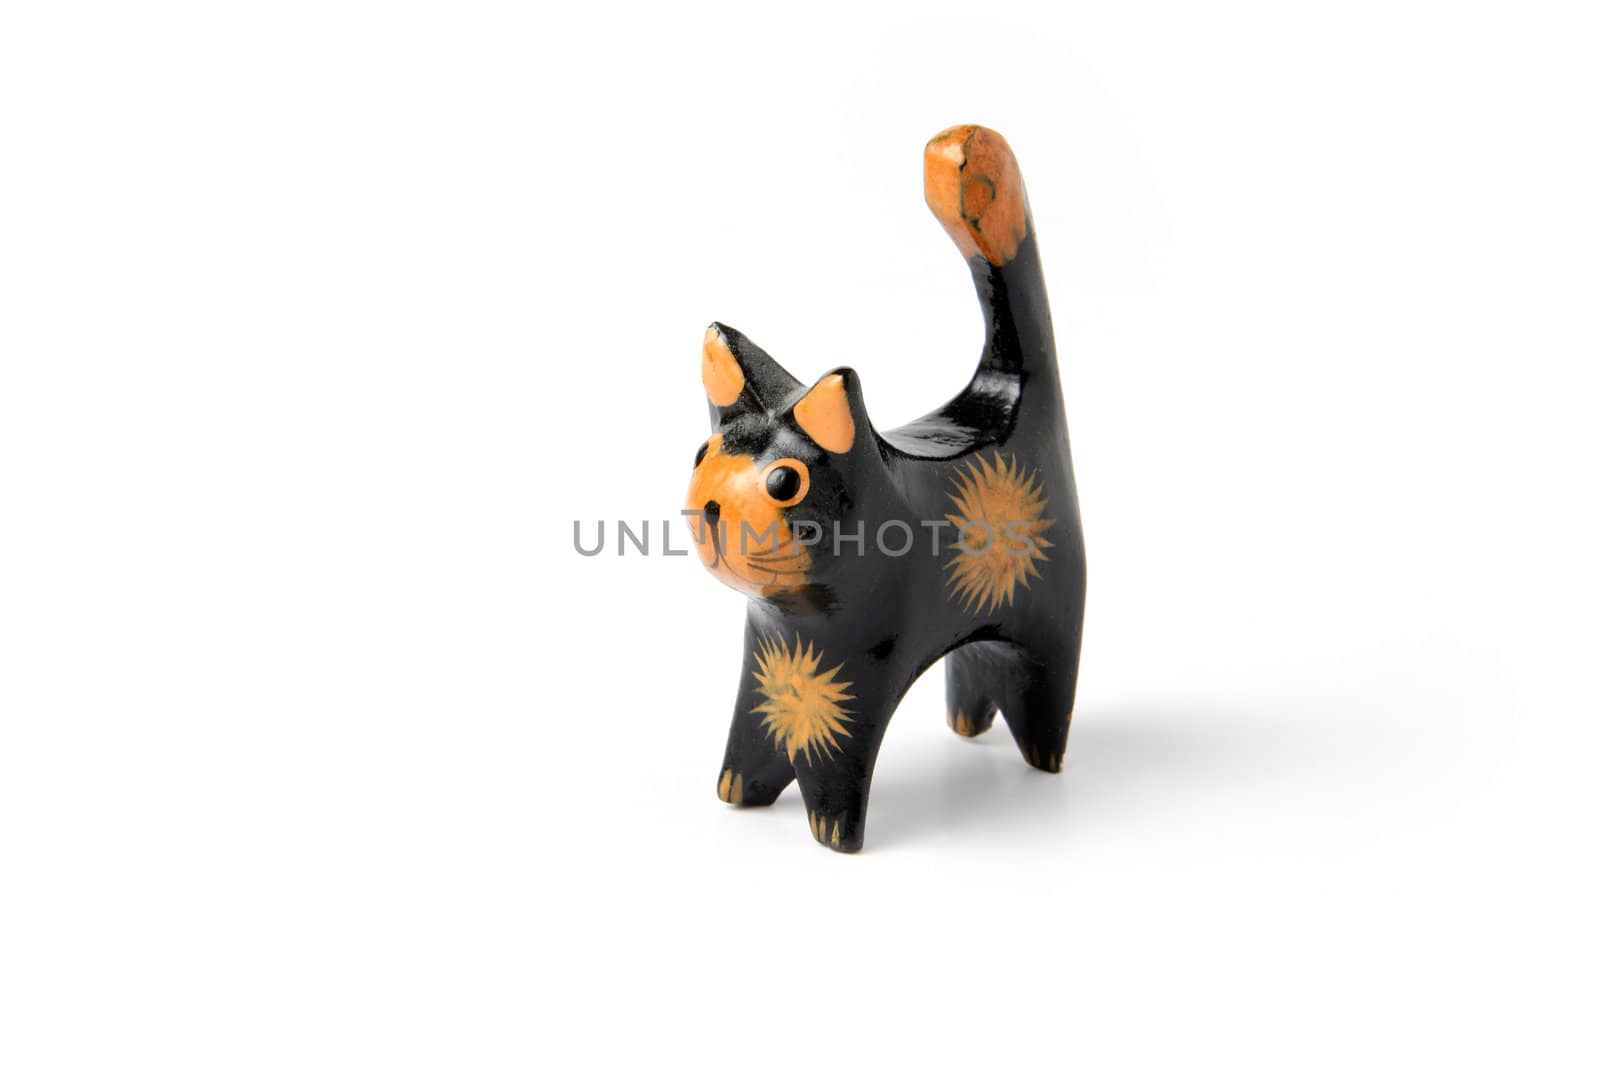 Ornamental wooden cat by phovoir